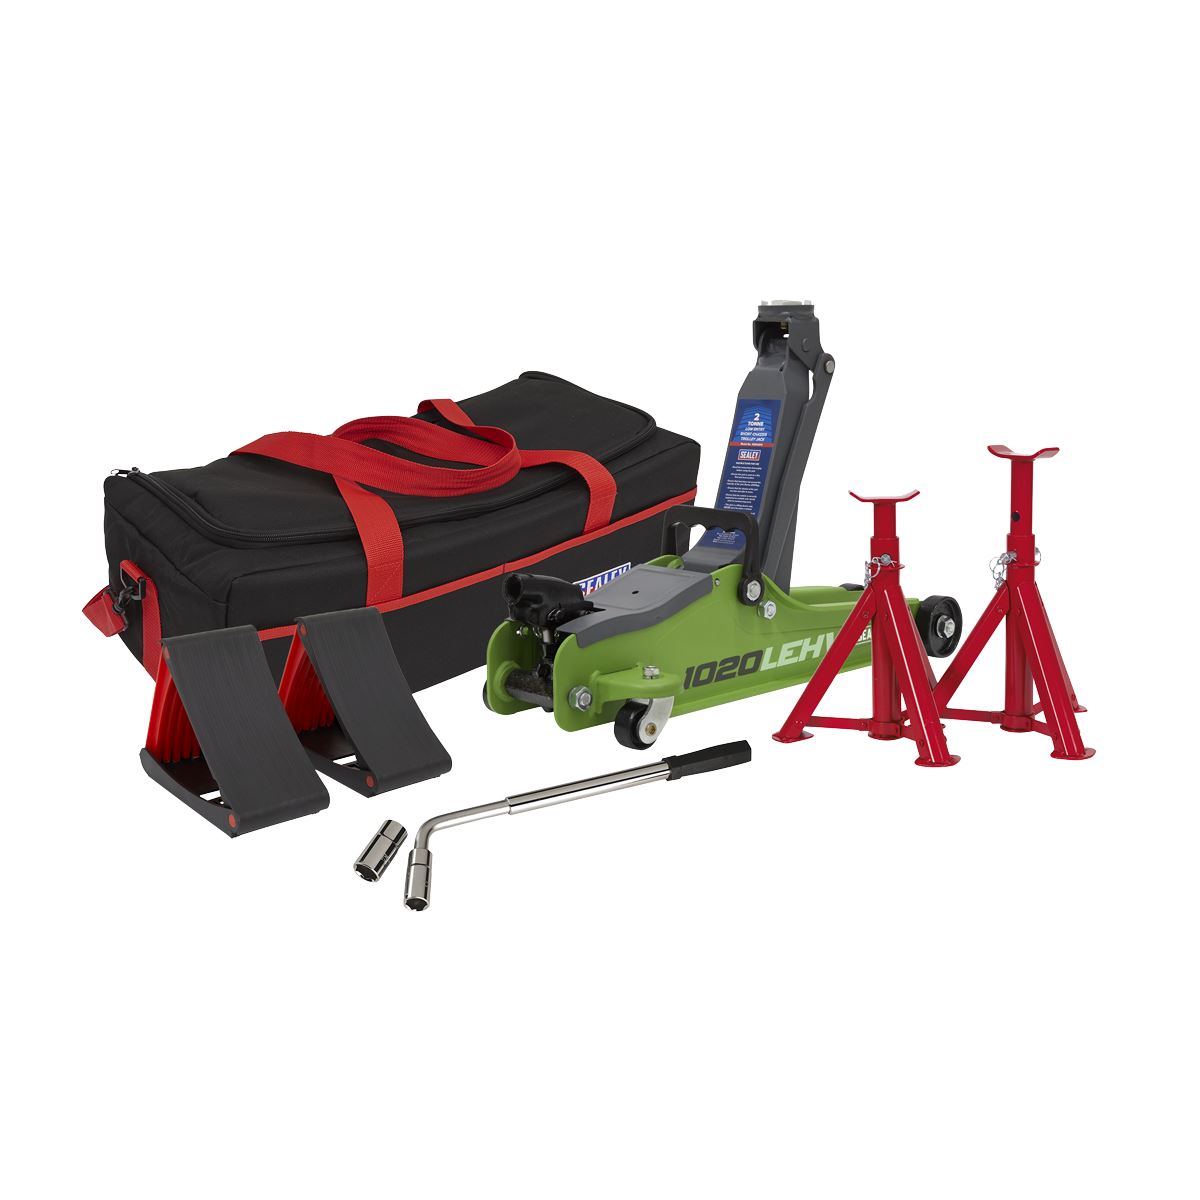 Sealey Low Entry Short Chassis Trolley Jack & Accessories Bag Combo, 2 Tonne - Green